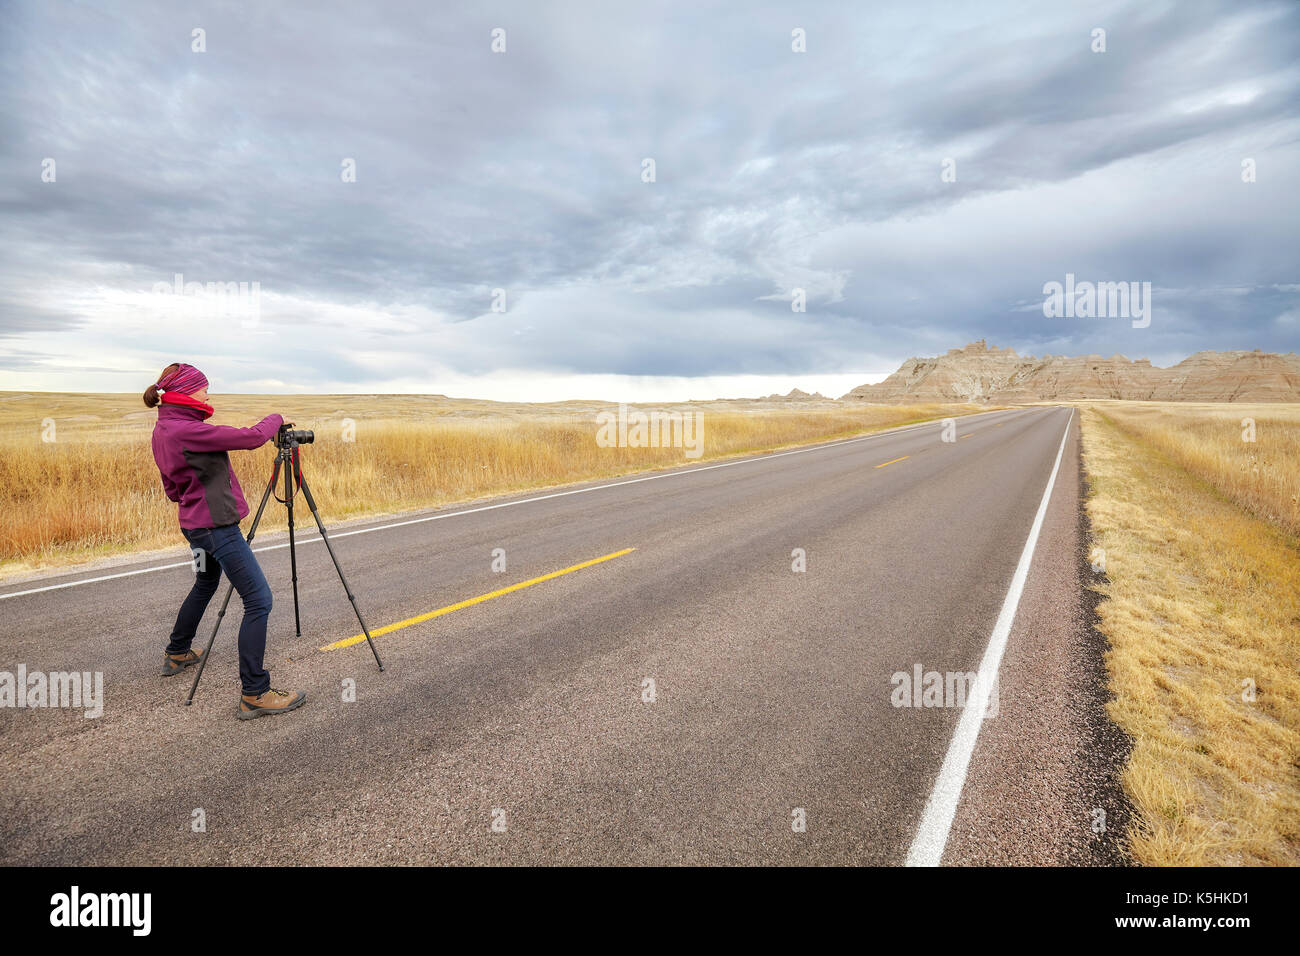 Landscape photographer takes pictures on an empty road with stormy sky, travel or work concept,  Badlands National Park, South Dakota, USA. Stock Photo